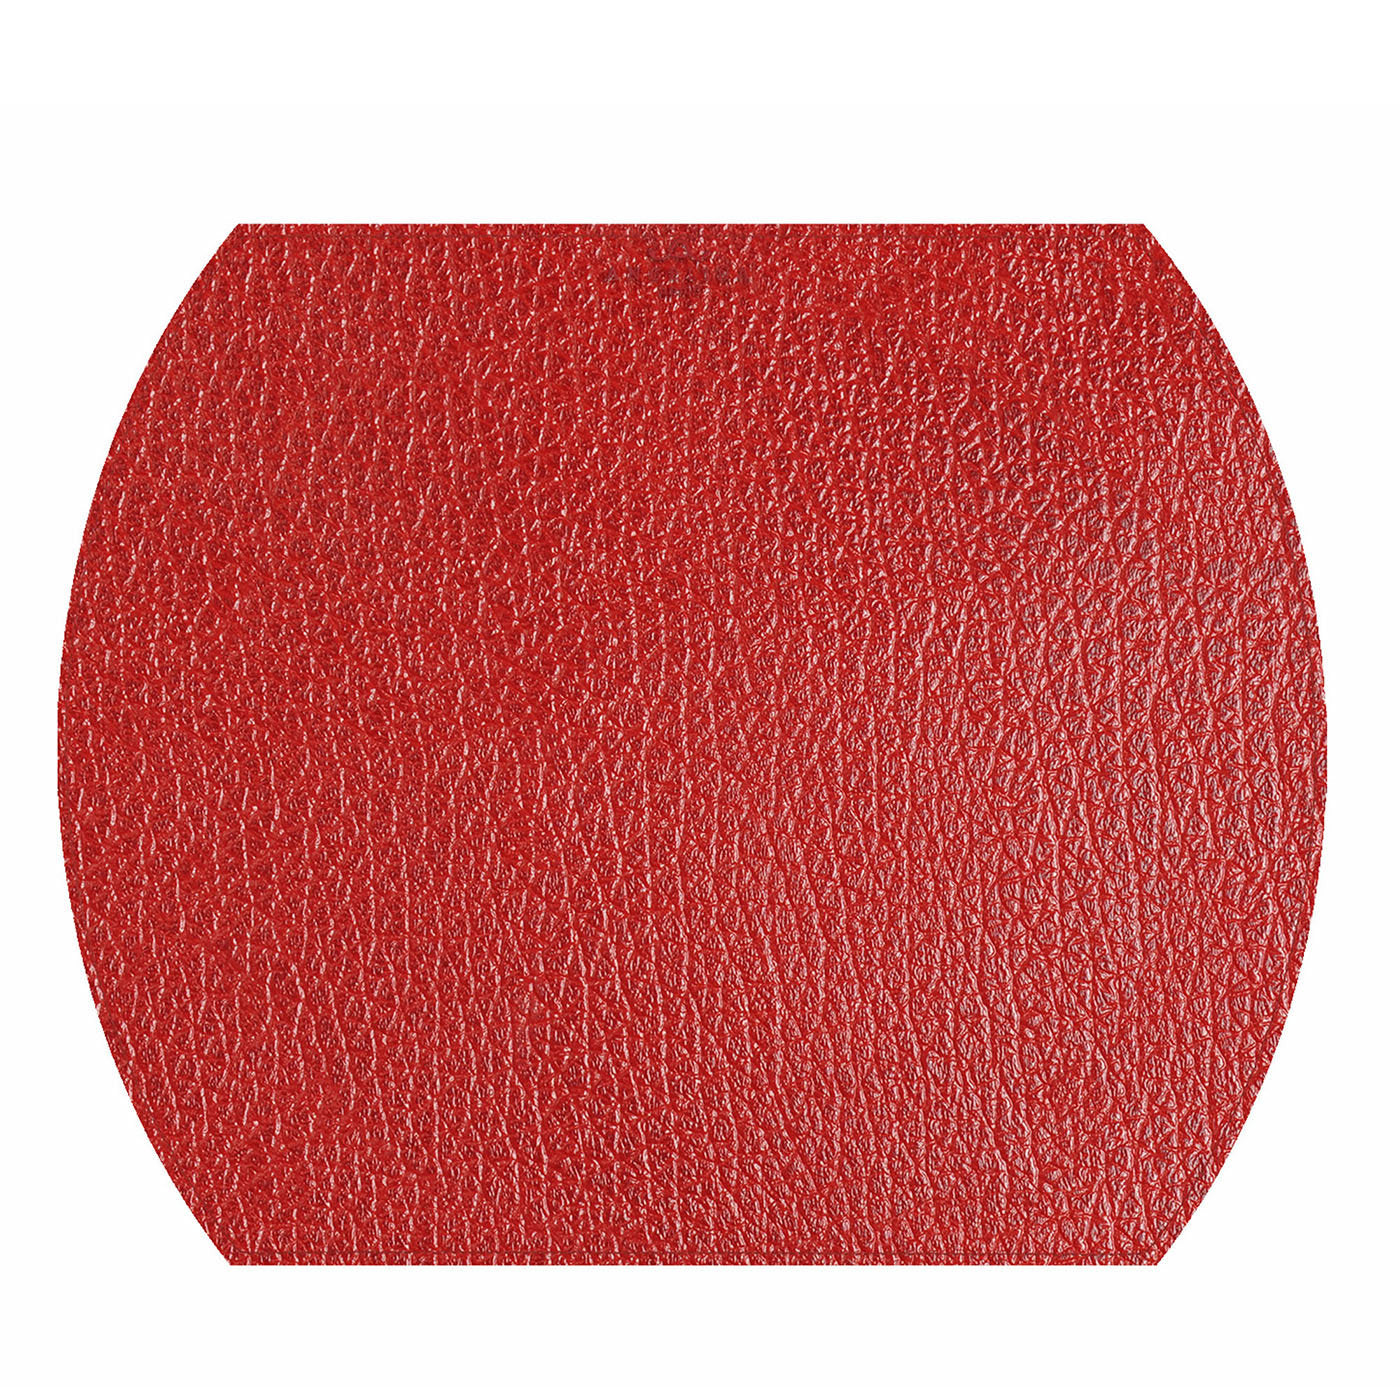 Tanzania Medium Set of 2 Red Leather Placemats - Alternative view 1